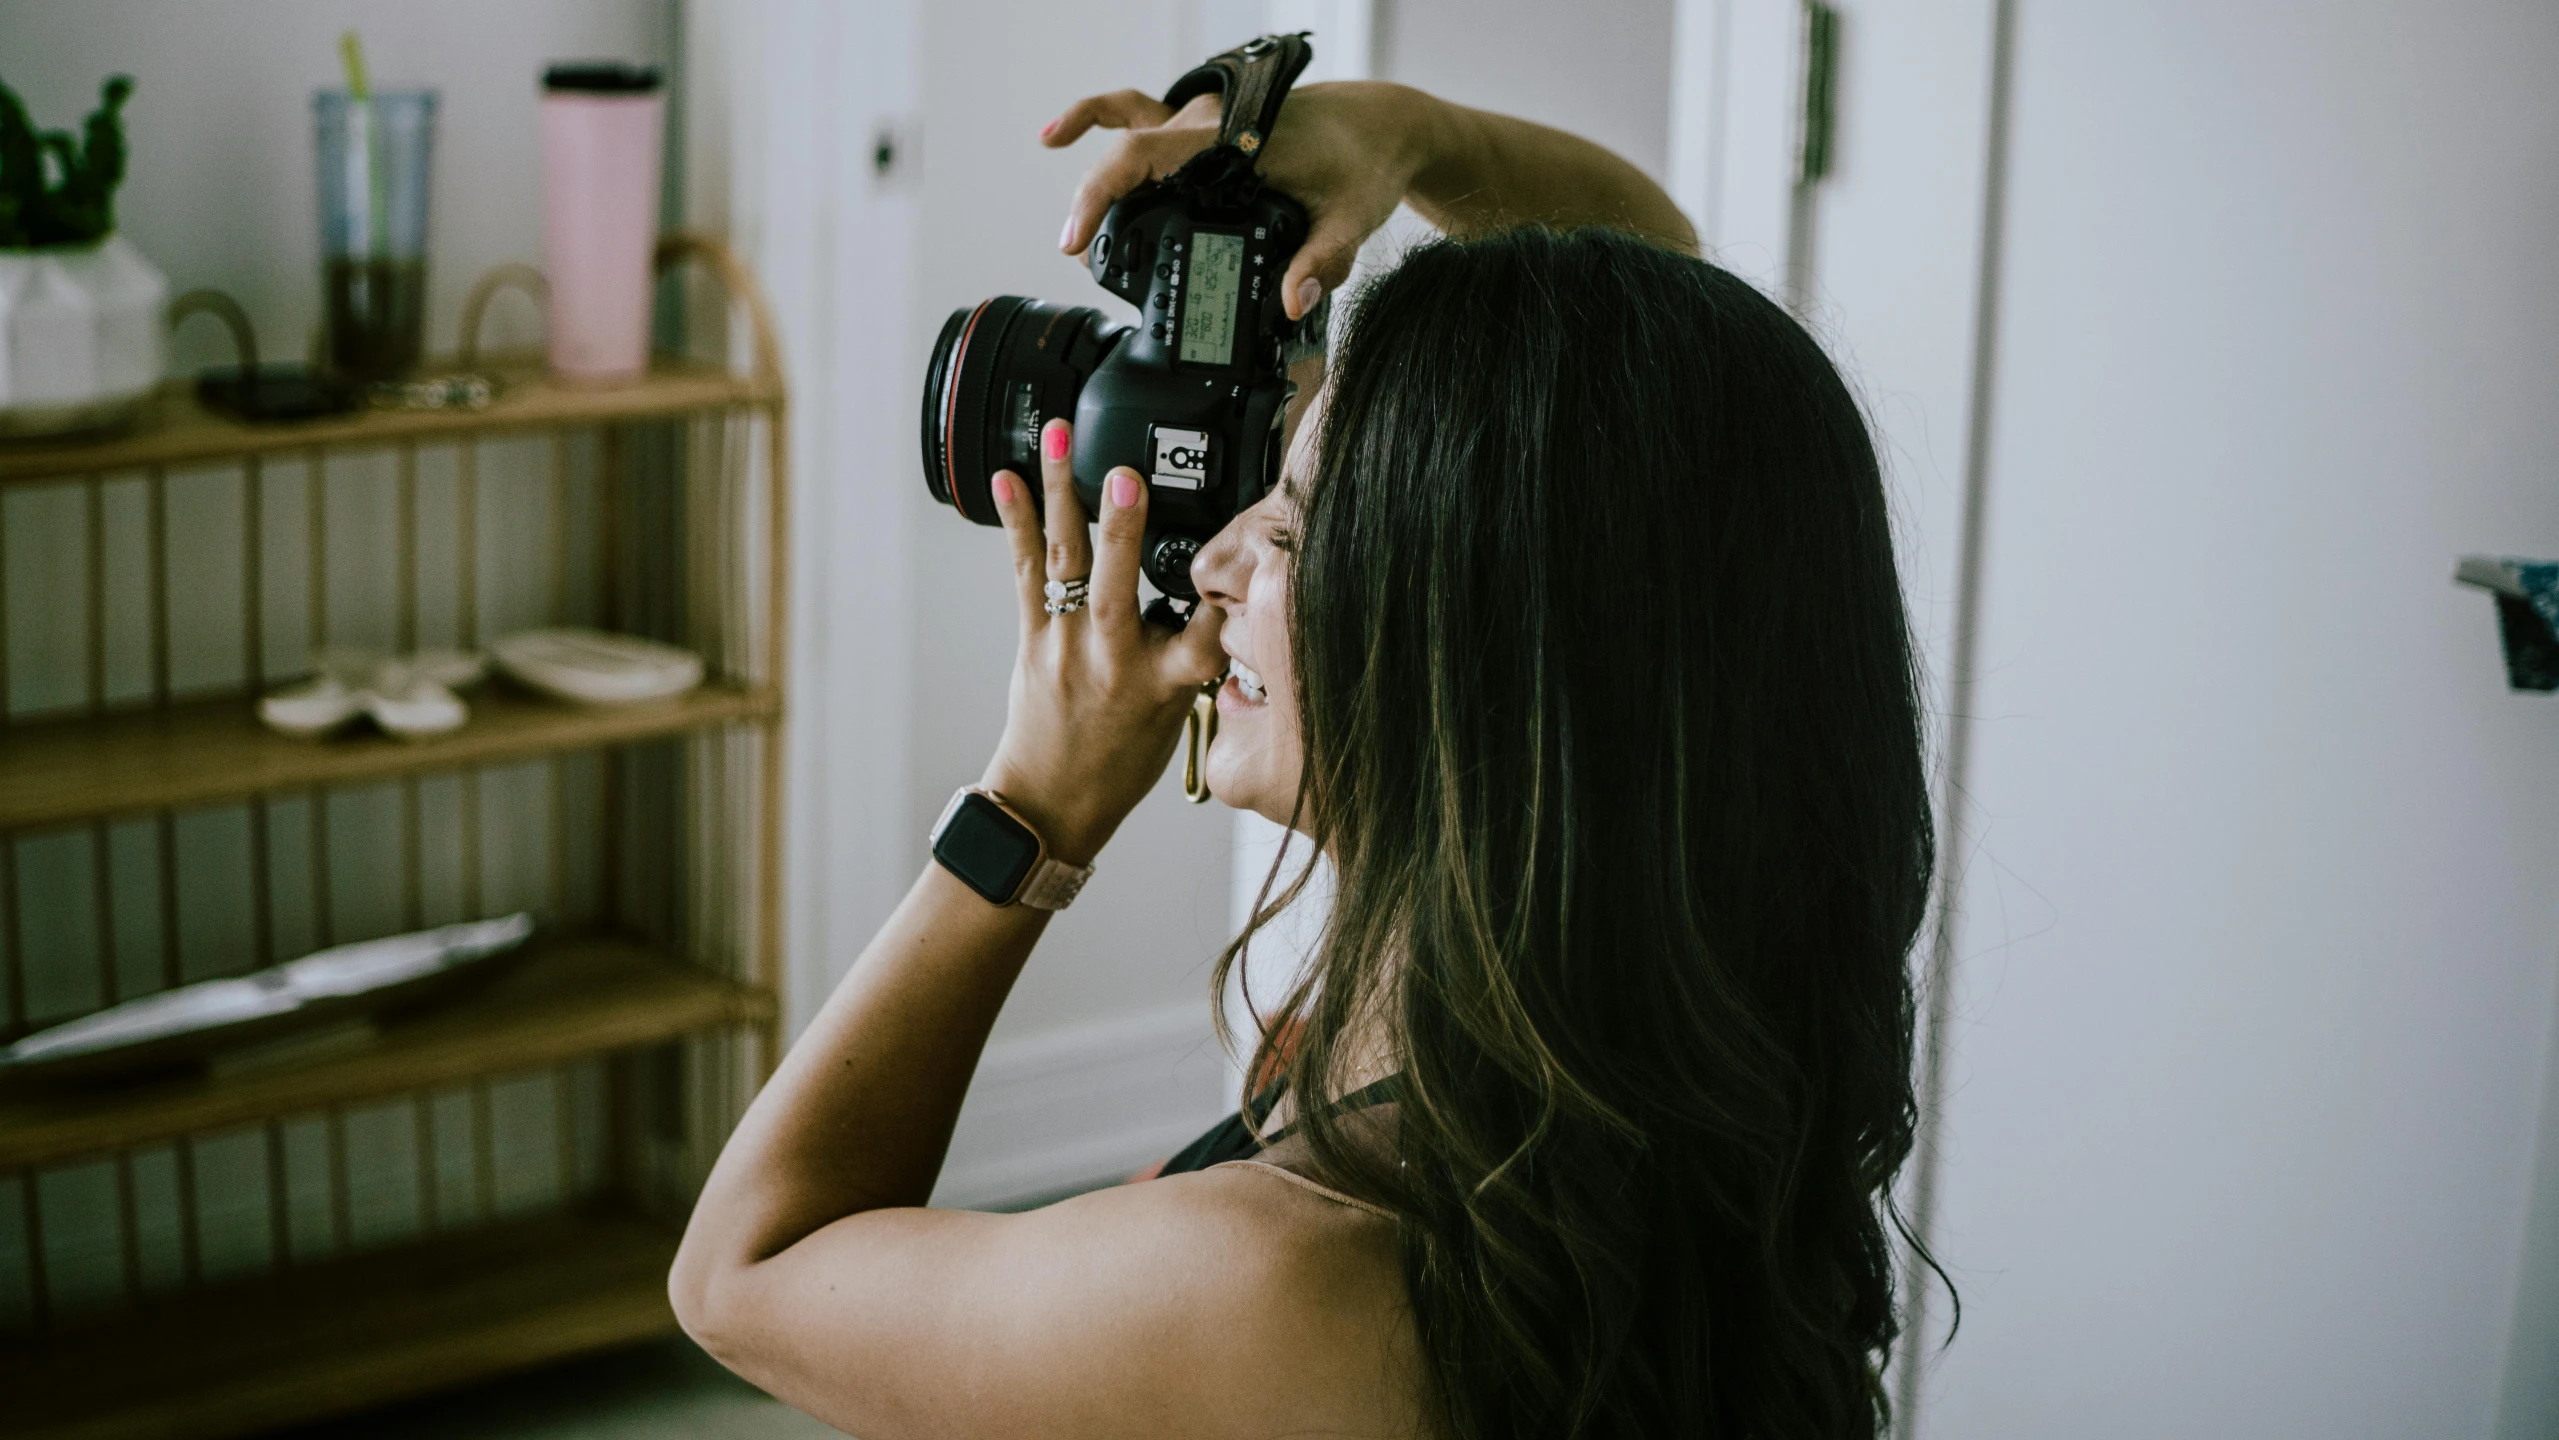 a woman holding a camera up to her face, pexels contest winner, photoshoot for skincare brand, looking from behind, indoor picture, body and headshot